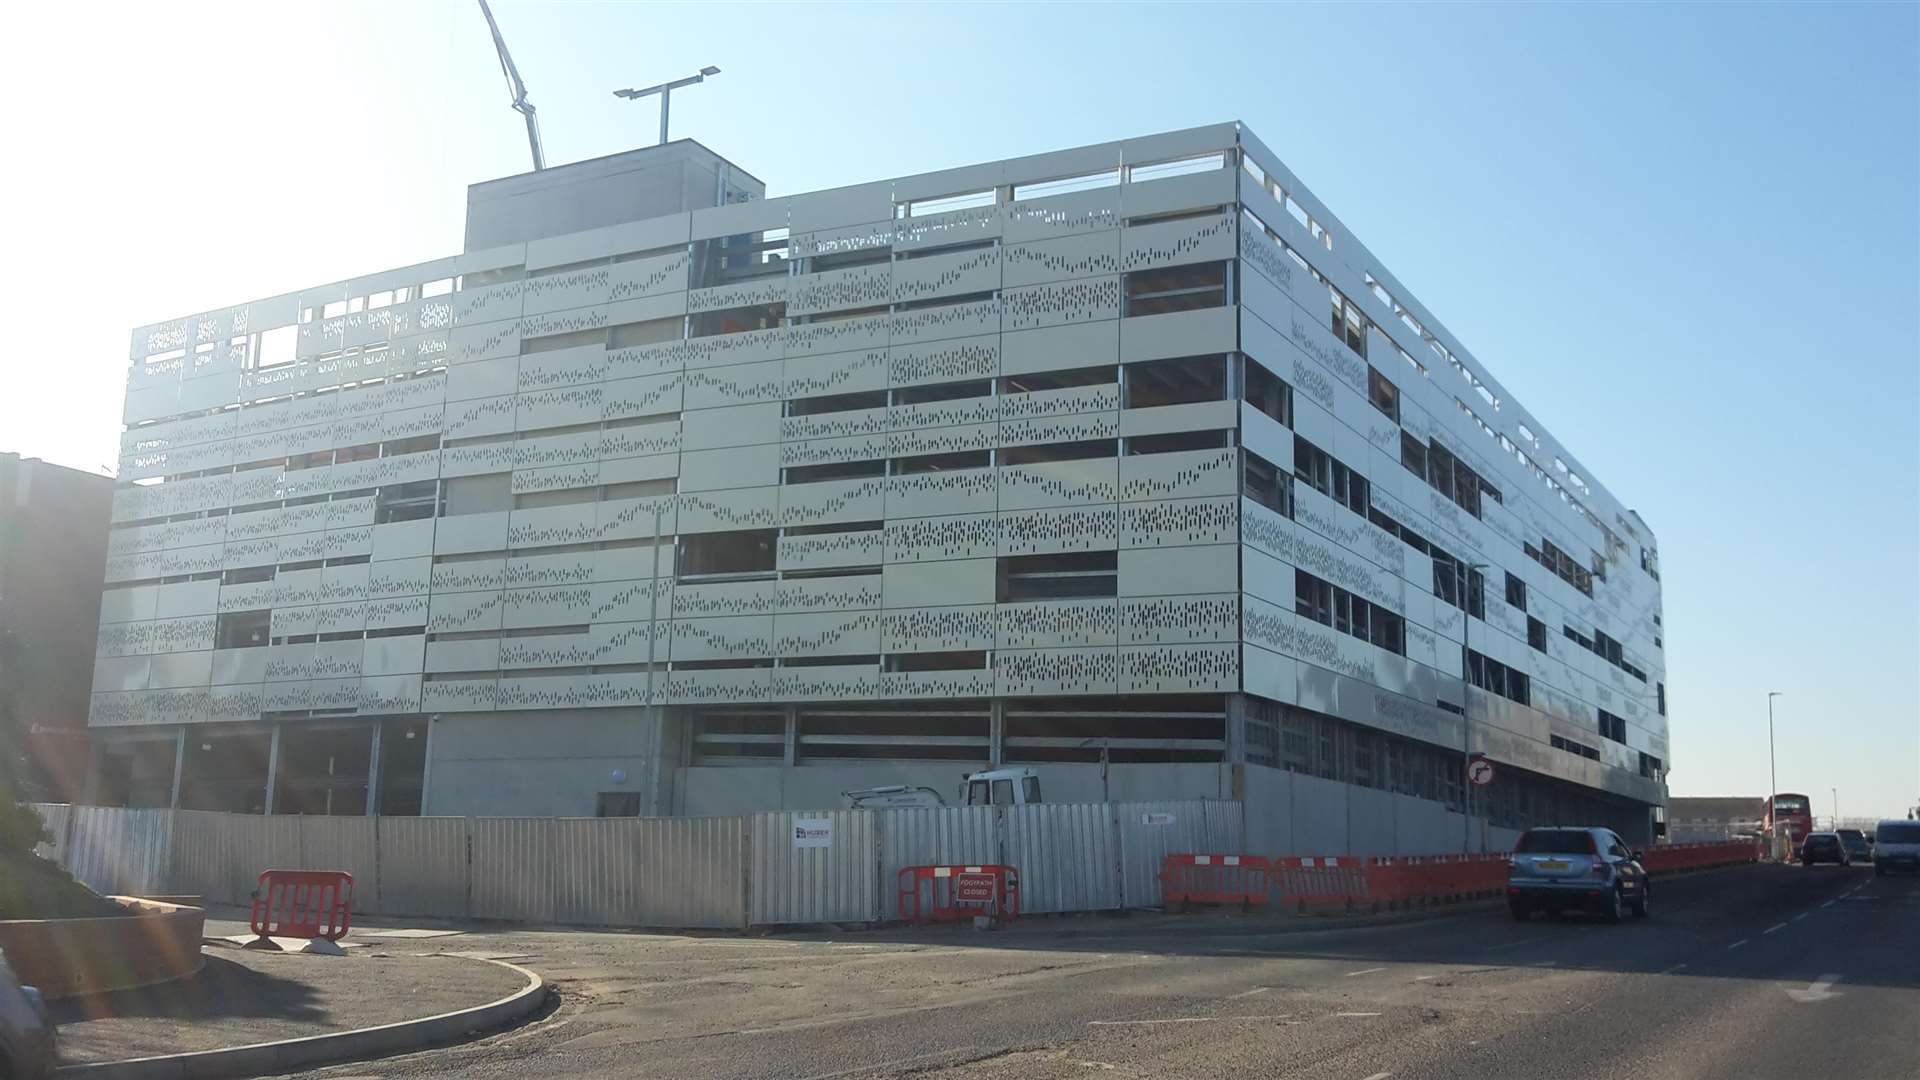 The new multi-storey car park in Sittingbourne is due to open in April